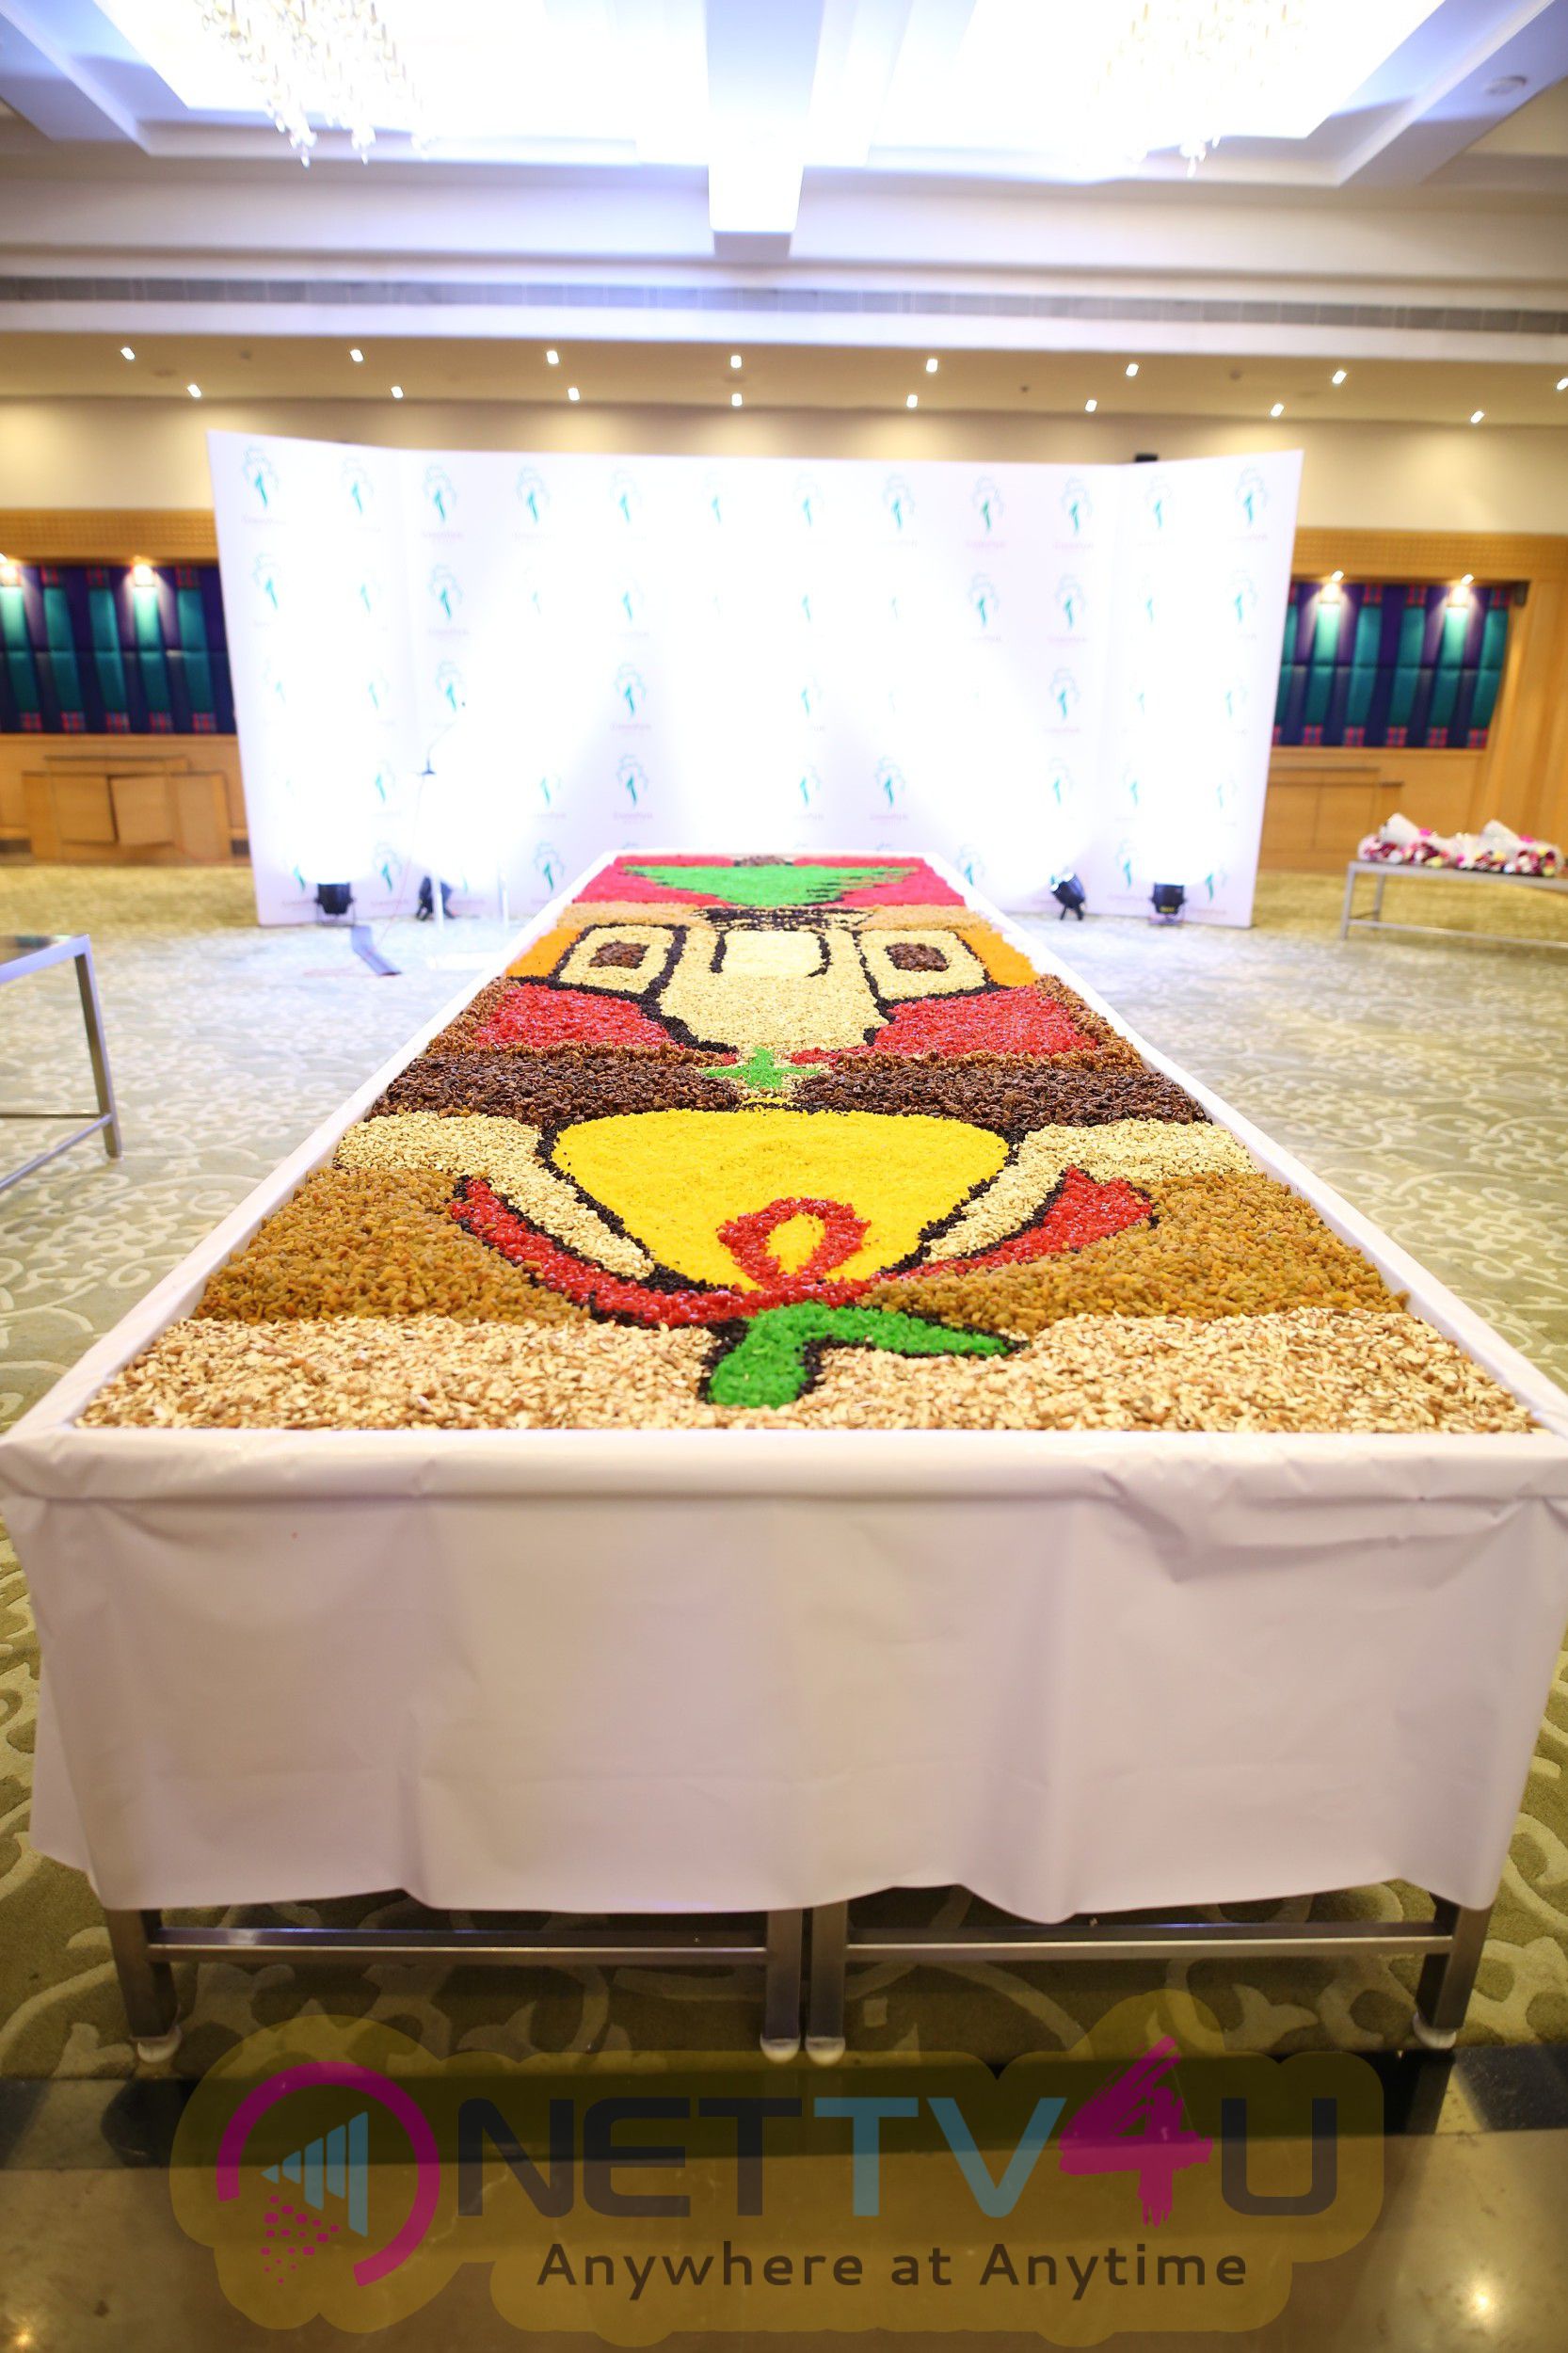 Hotel Green Park's Traditional Cake Mixing Ceremony Event Stills Tamil Gallery